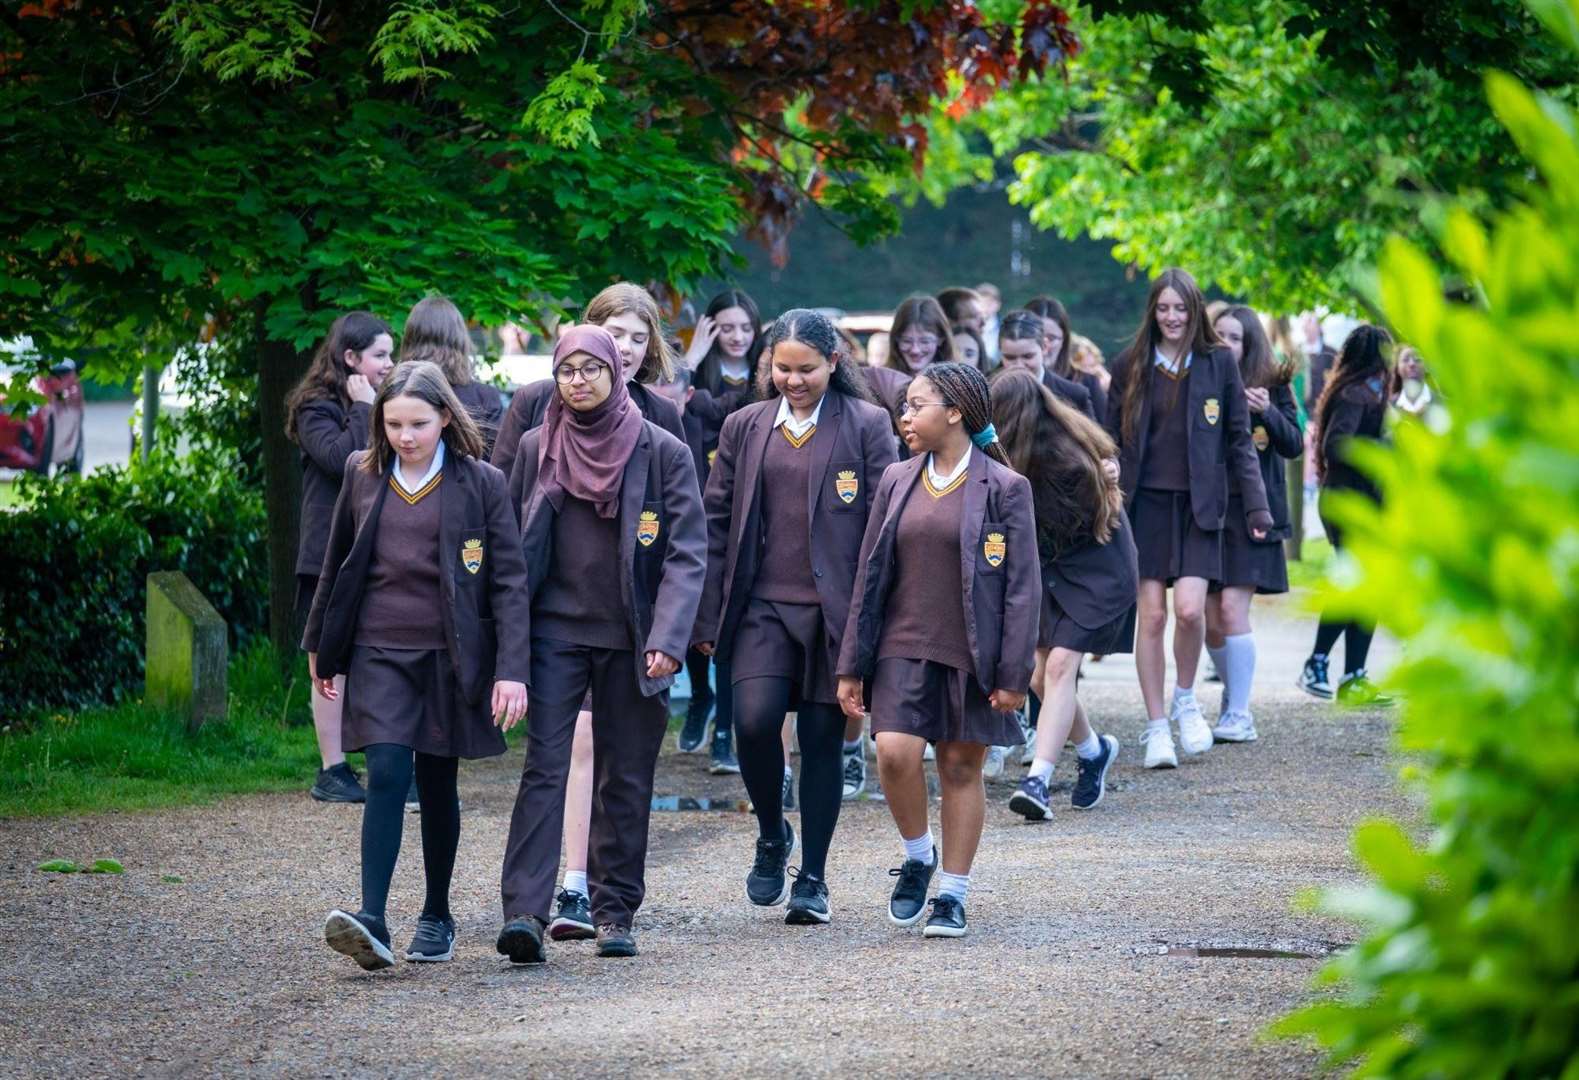 The MGGS whole school wellbeing walk